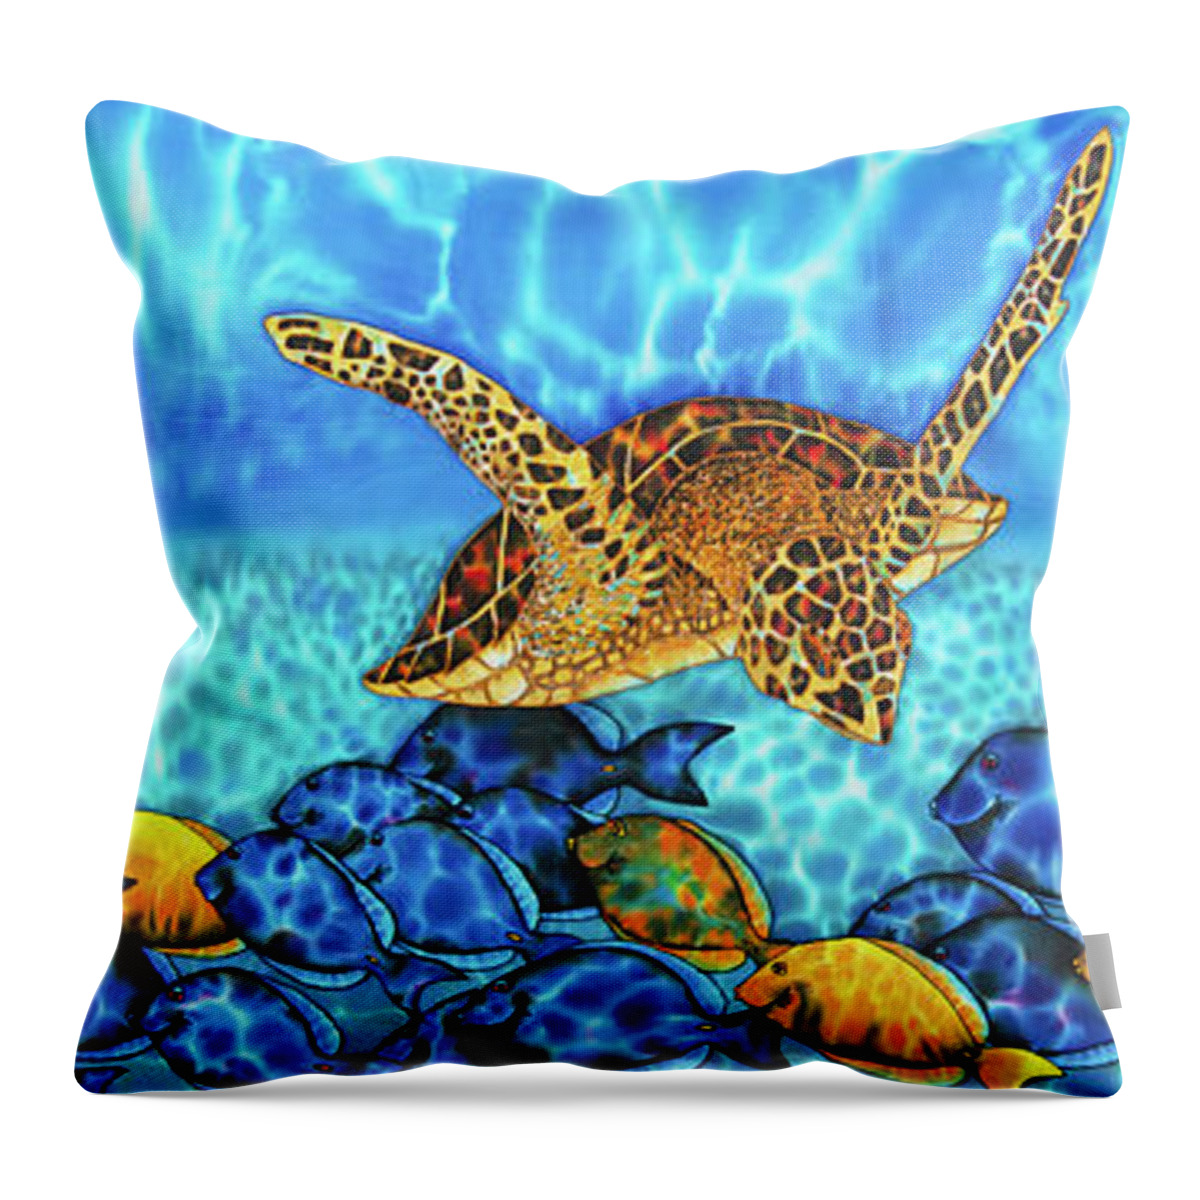 Turtle Throw Pillow featuring the painting Akumal by Daniel Jean-Baptiste